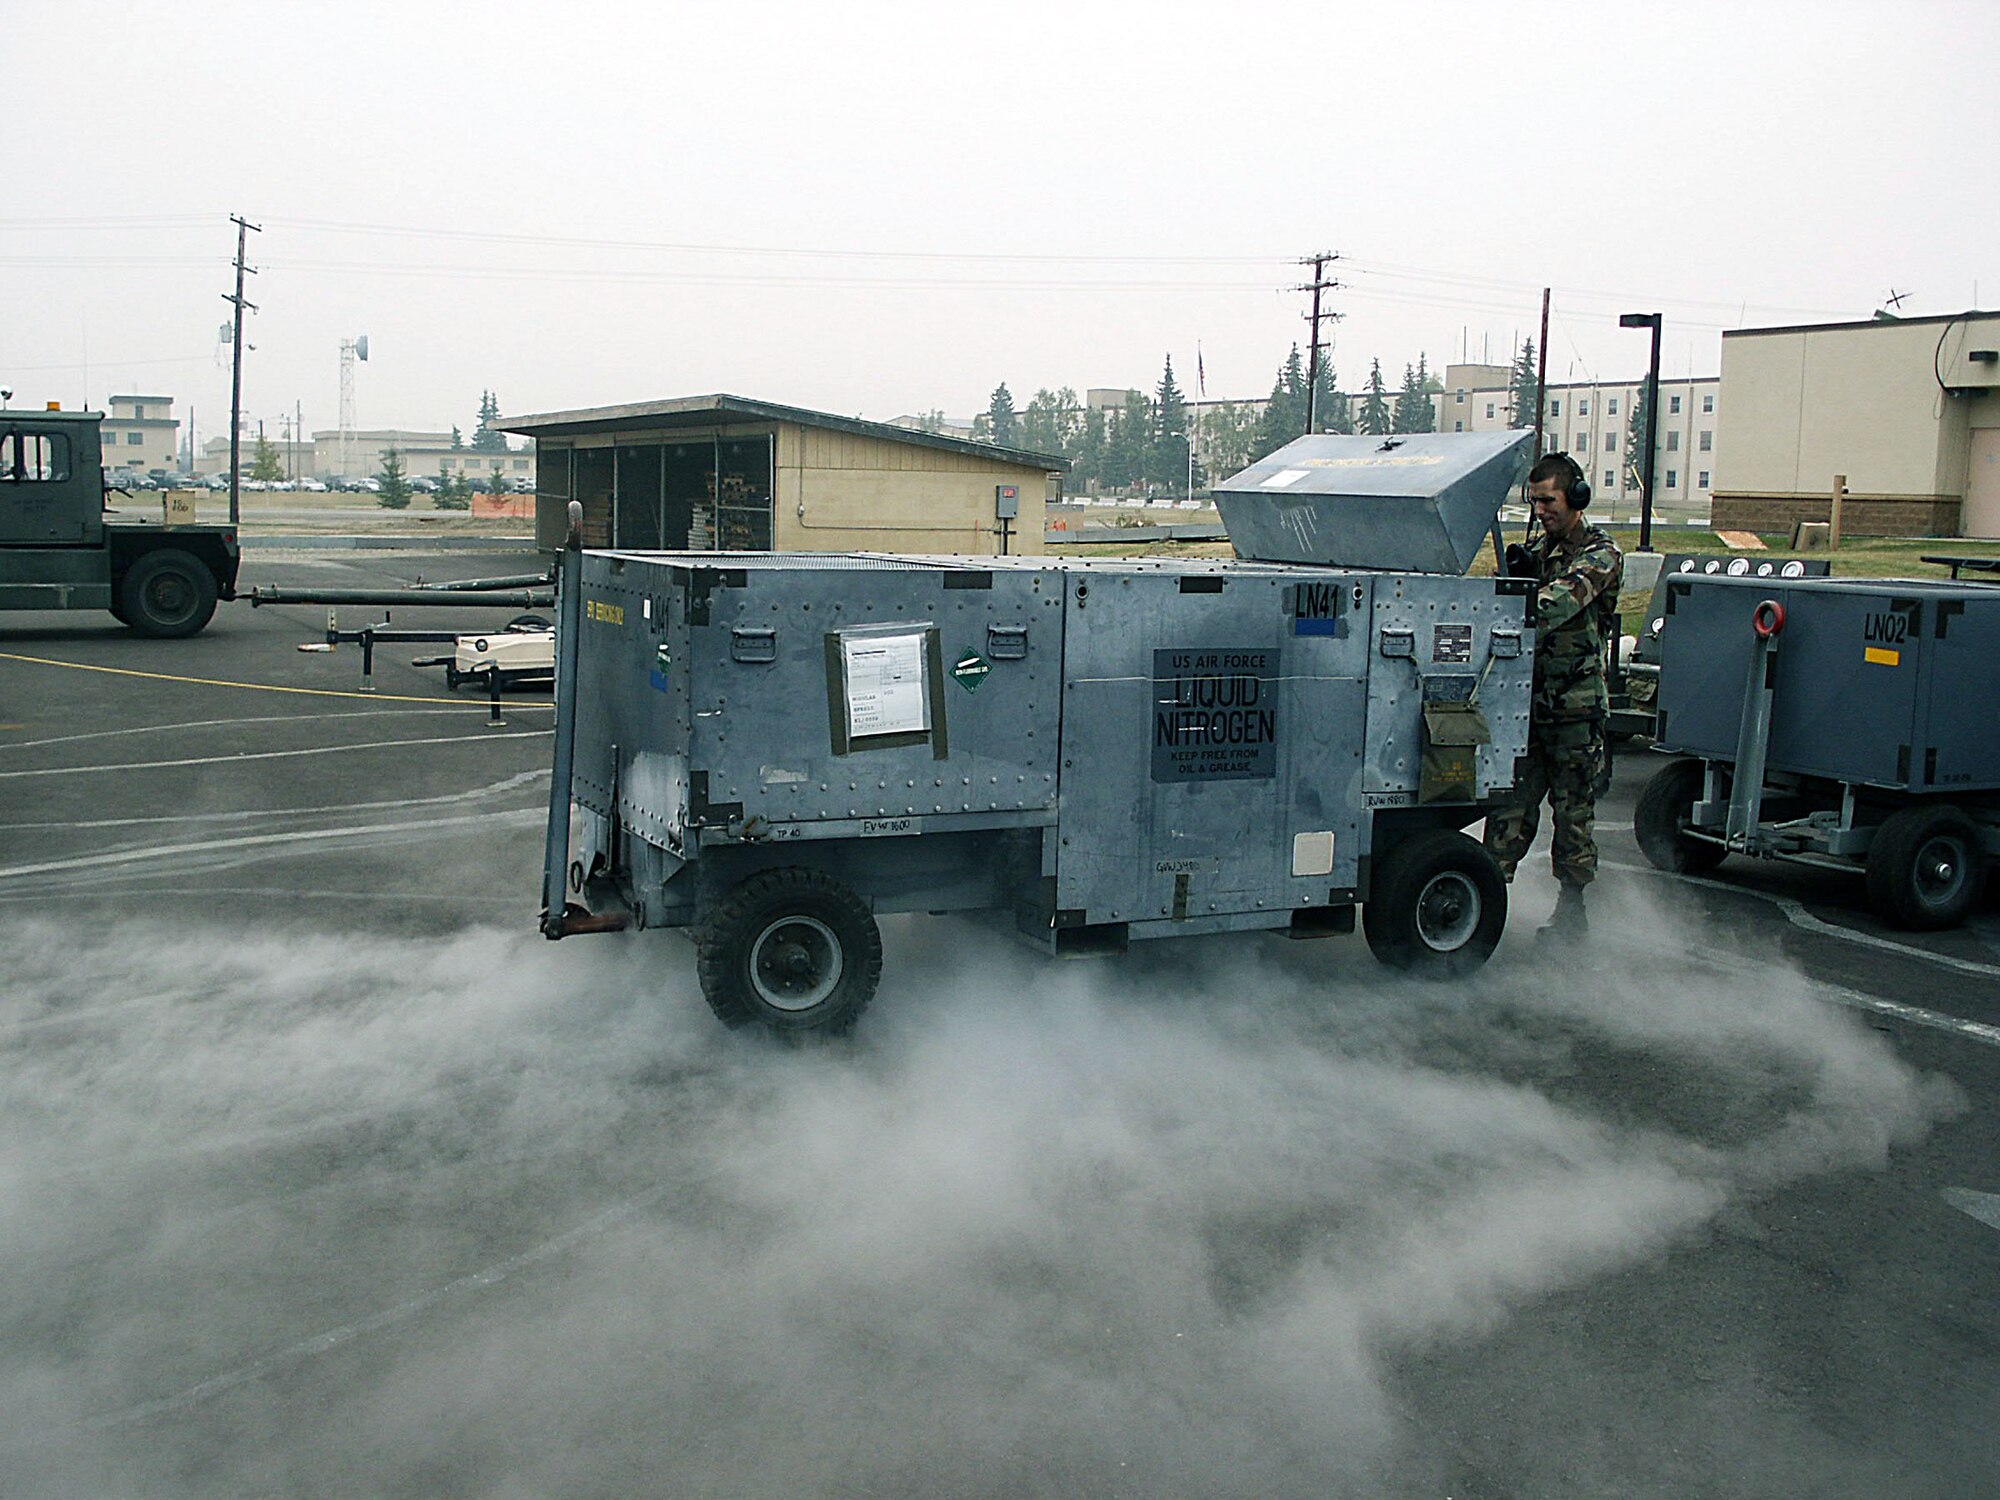 EIELSON AIR FORCE BASE, Alaska -- Airman 1st Class Gary Karlson prepares a liquid nitrogen cart Aug. 19 here during Cope Thunder 04-02.  He is an electrical and environmental specialist with the 77th Fighter Squadron from Shaw Air Force Base, S.C.  (U.S. Air Force photo by Master Sgt. Terry Nelson)